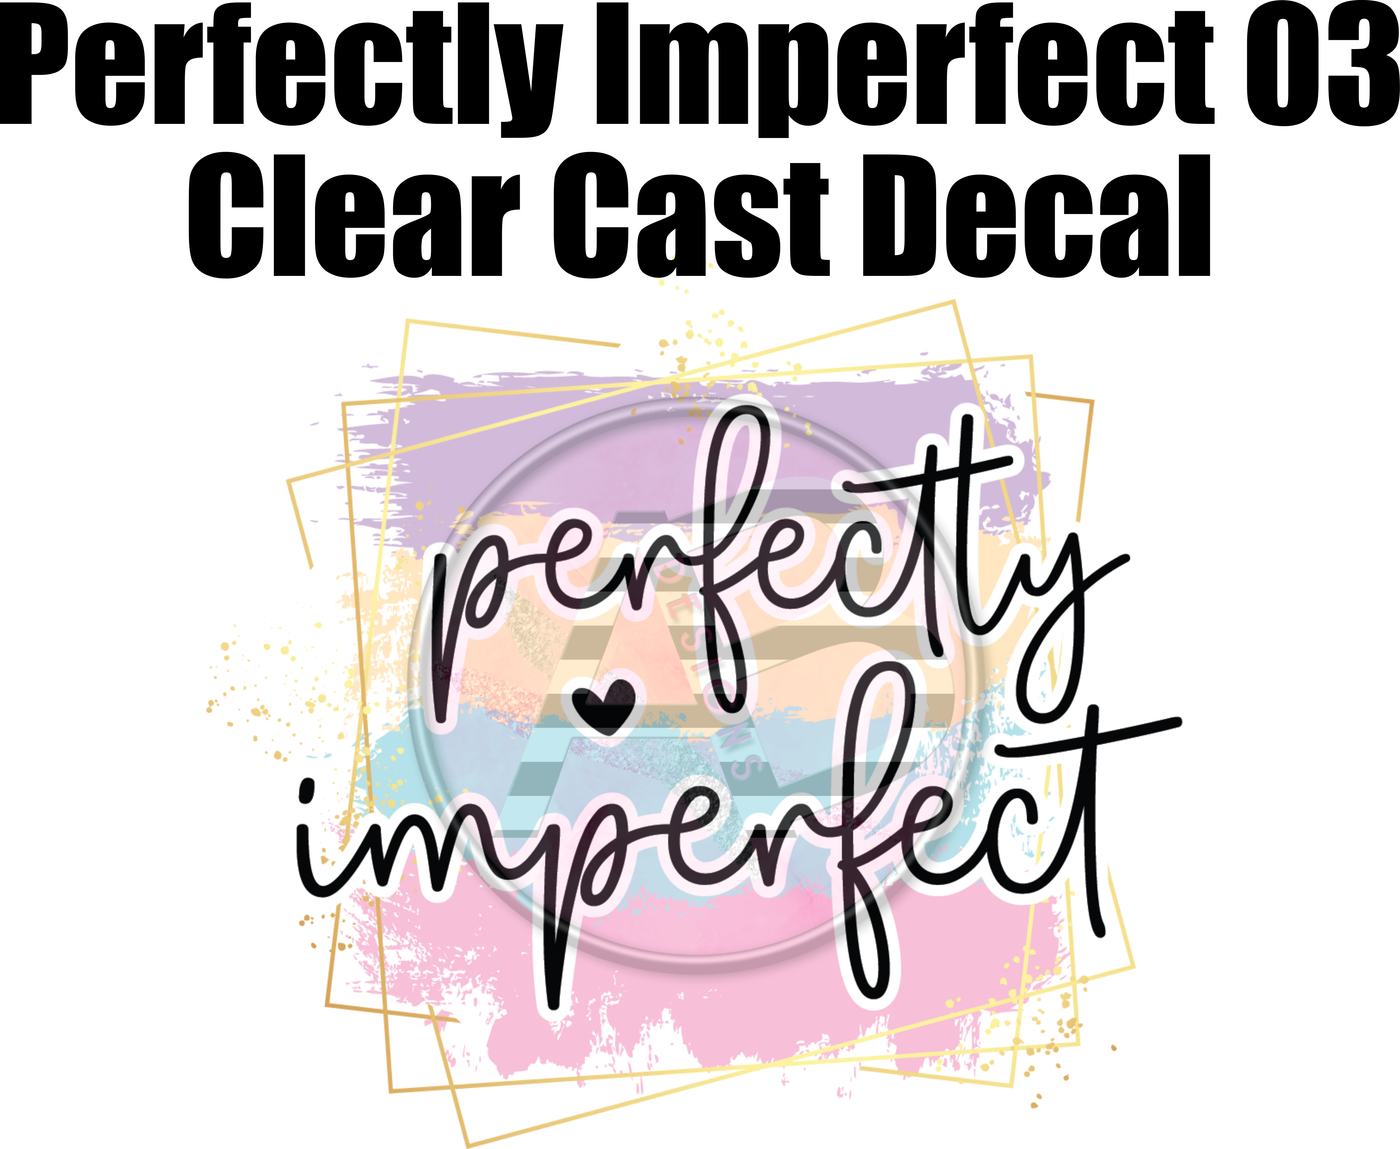 Perfectly Imperfect 03 - Clear Cast Decal